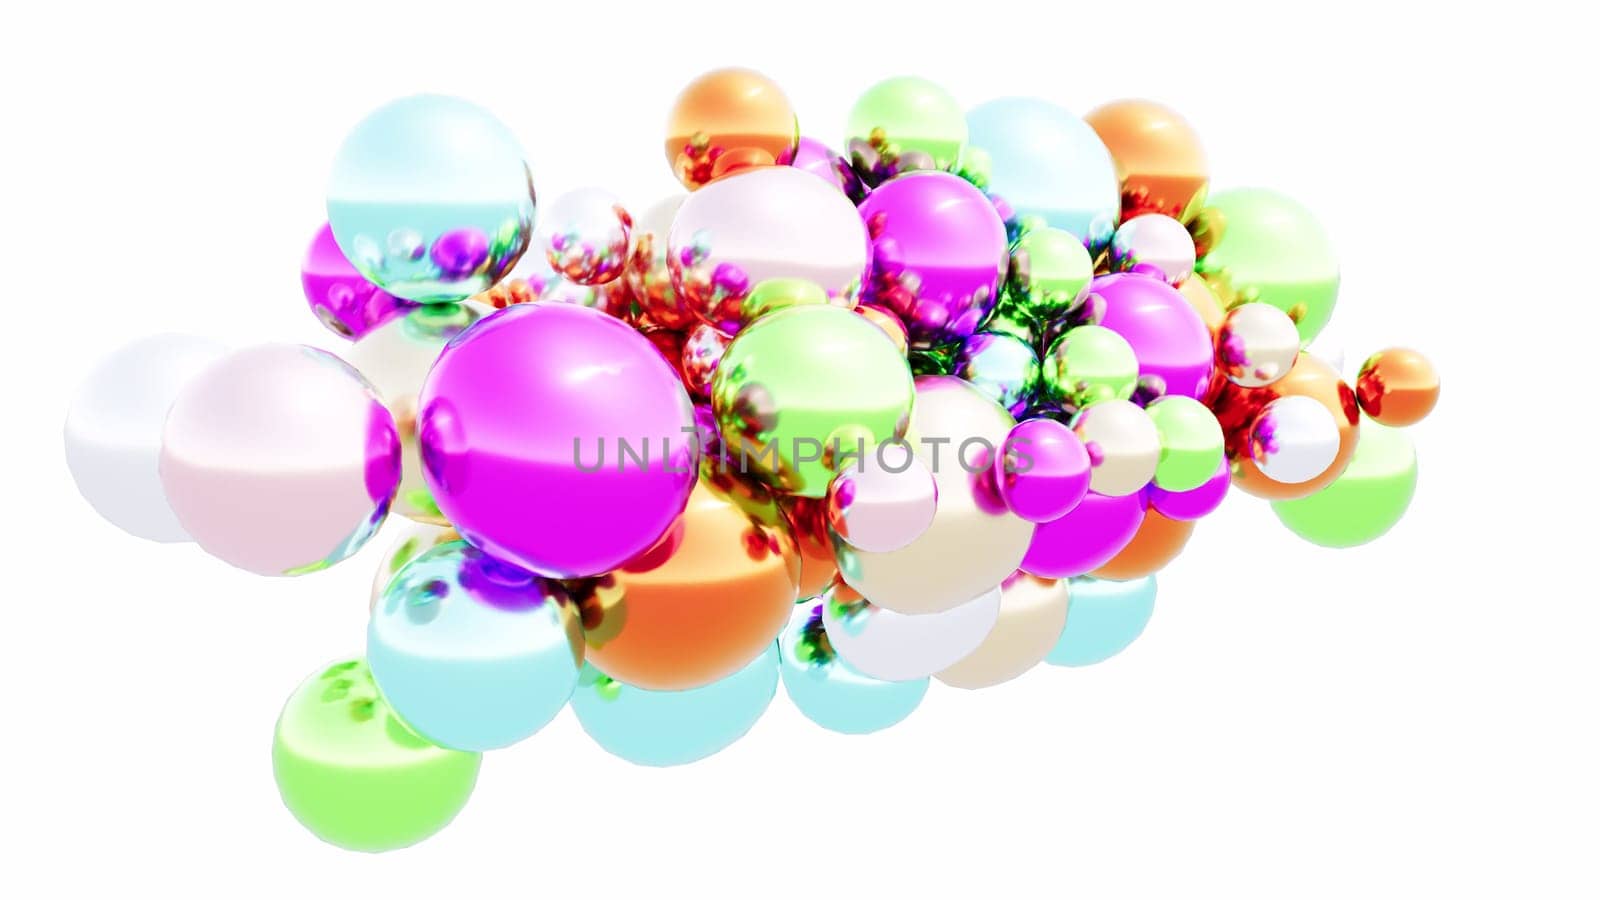 Color soft metal balls on white 3d render by Zozulinskyi